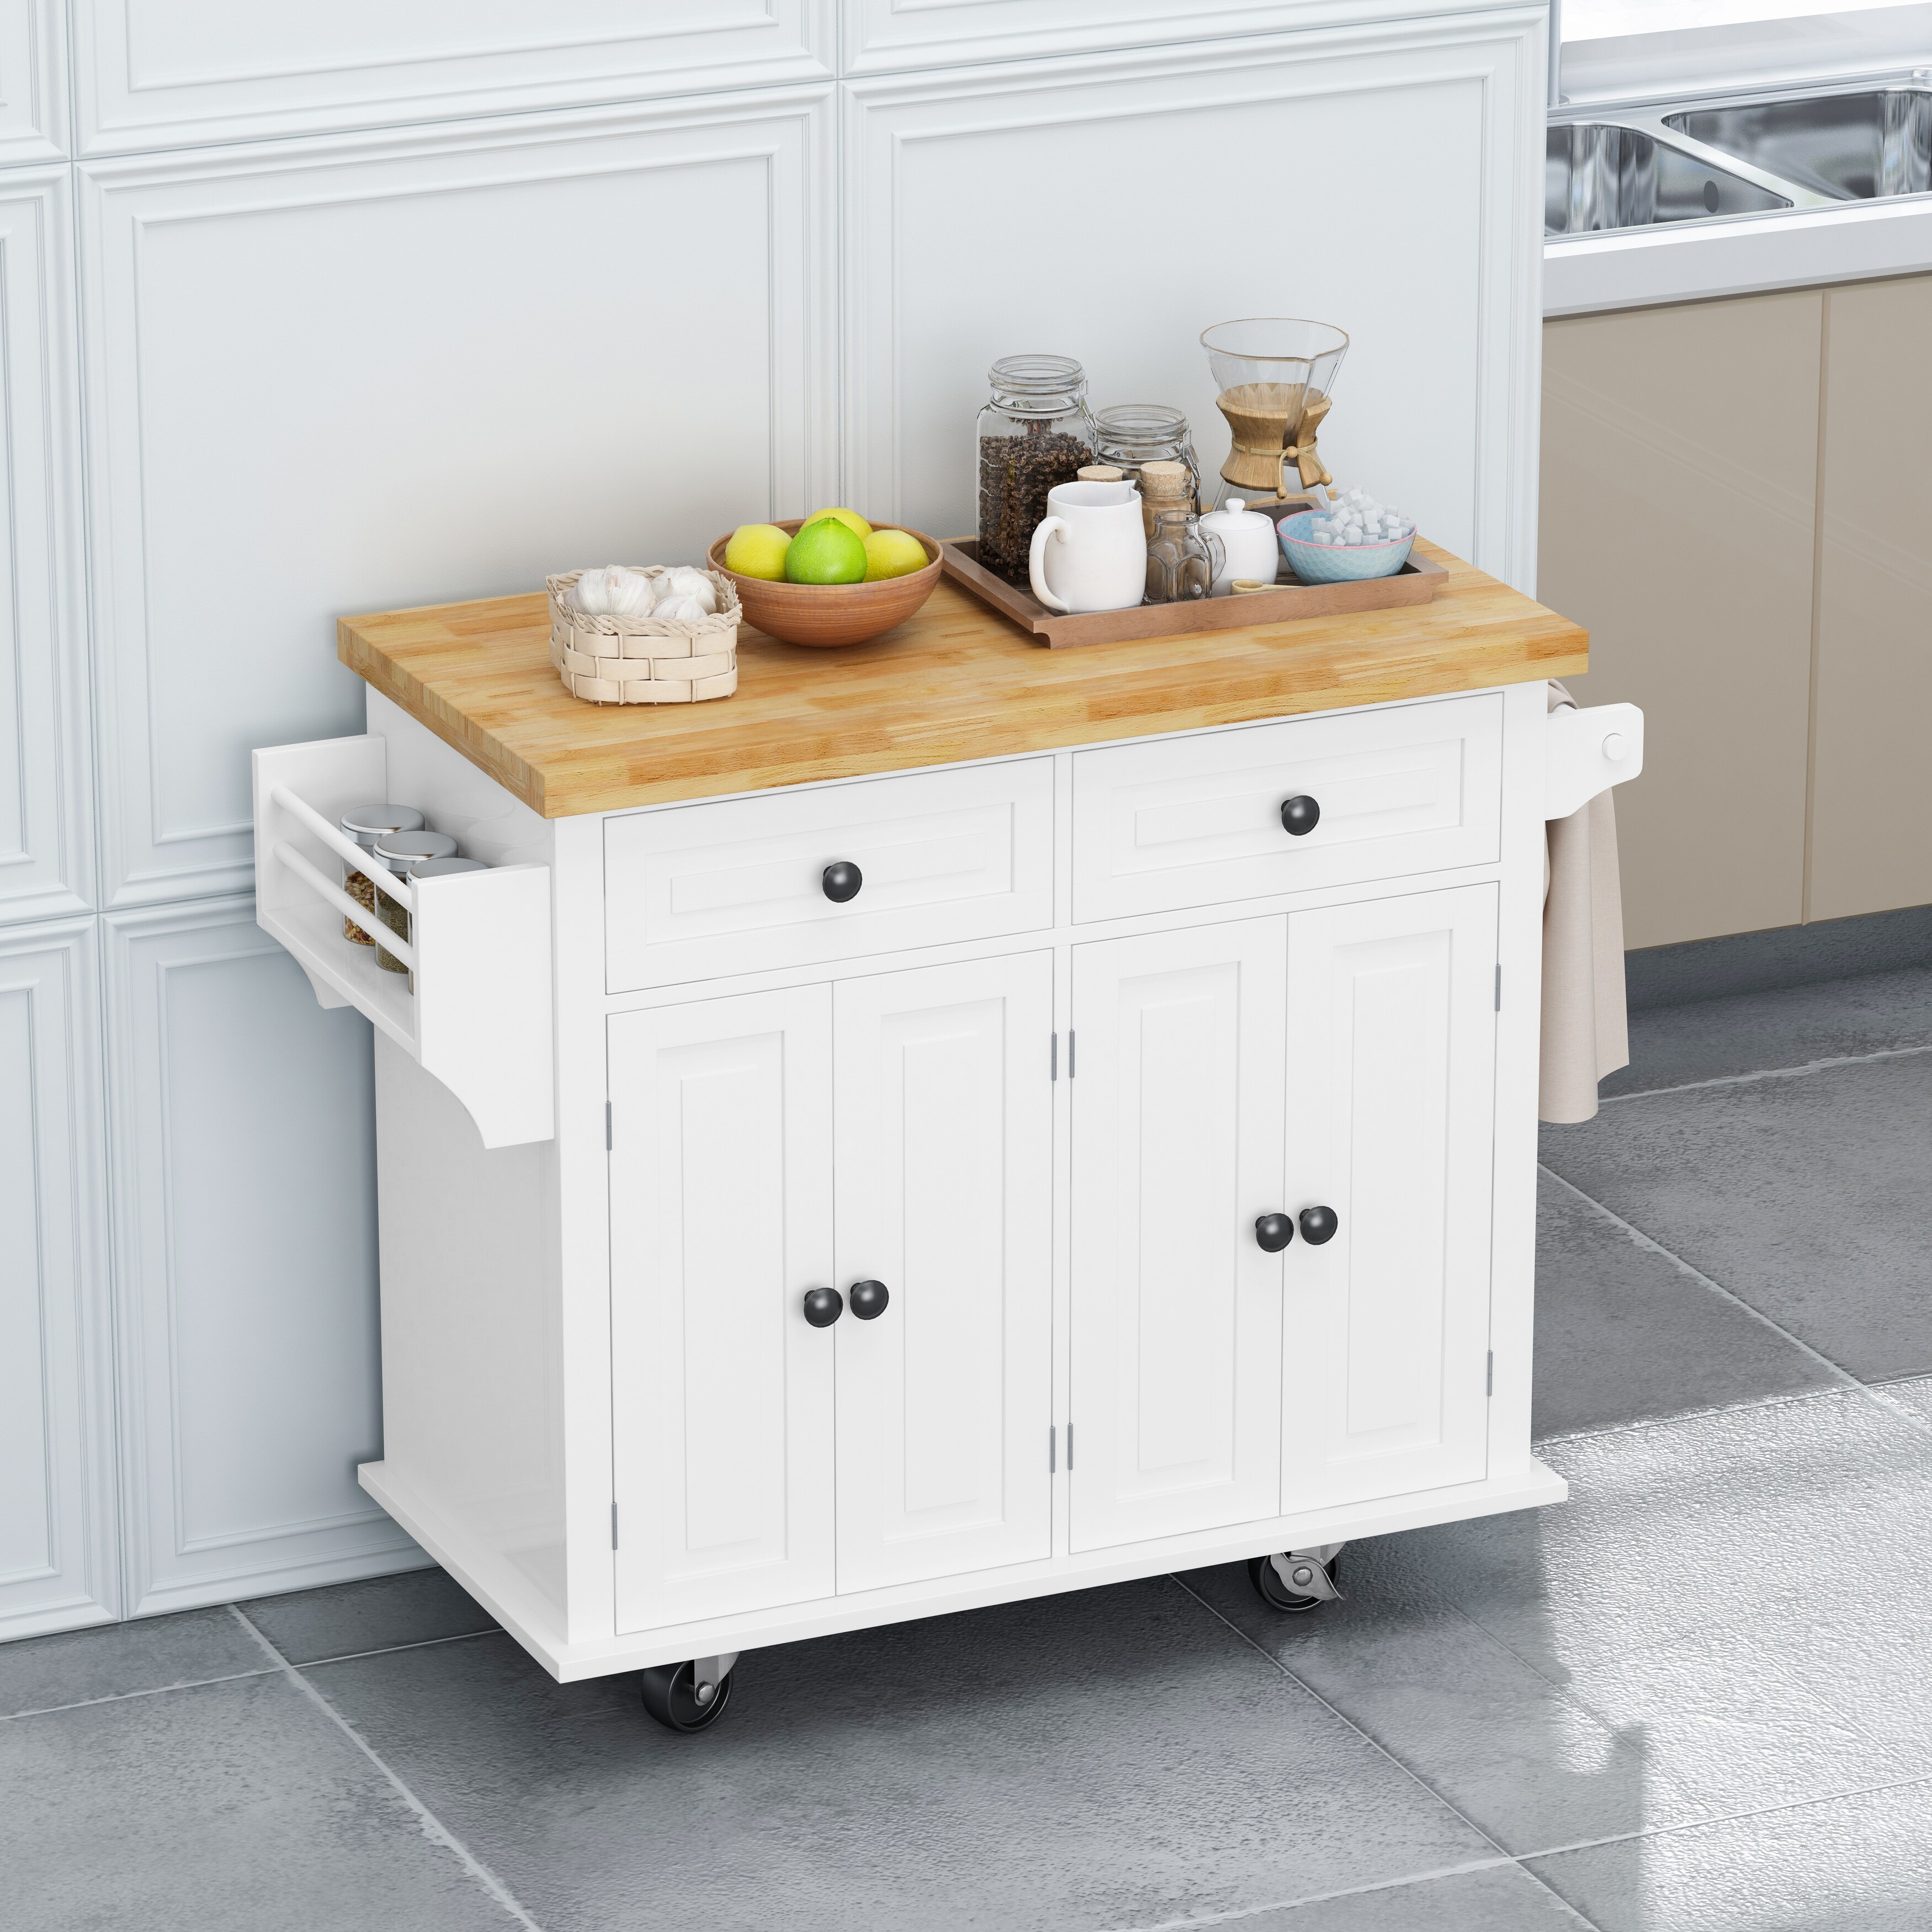 https://ak1.ostkcdn.com/images/products/is/images/direct/925cb6f0b7942520e0727207ccf947fb28cb9cc6/Kitchen-Island-Cart-with-Storage-Cabinets-and-Locking-Wheels%2C-Wood-4-Door-Cabinet-and-Two-Drawers%2C-Spice-Rack-Towel-Rack.jpg